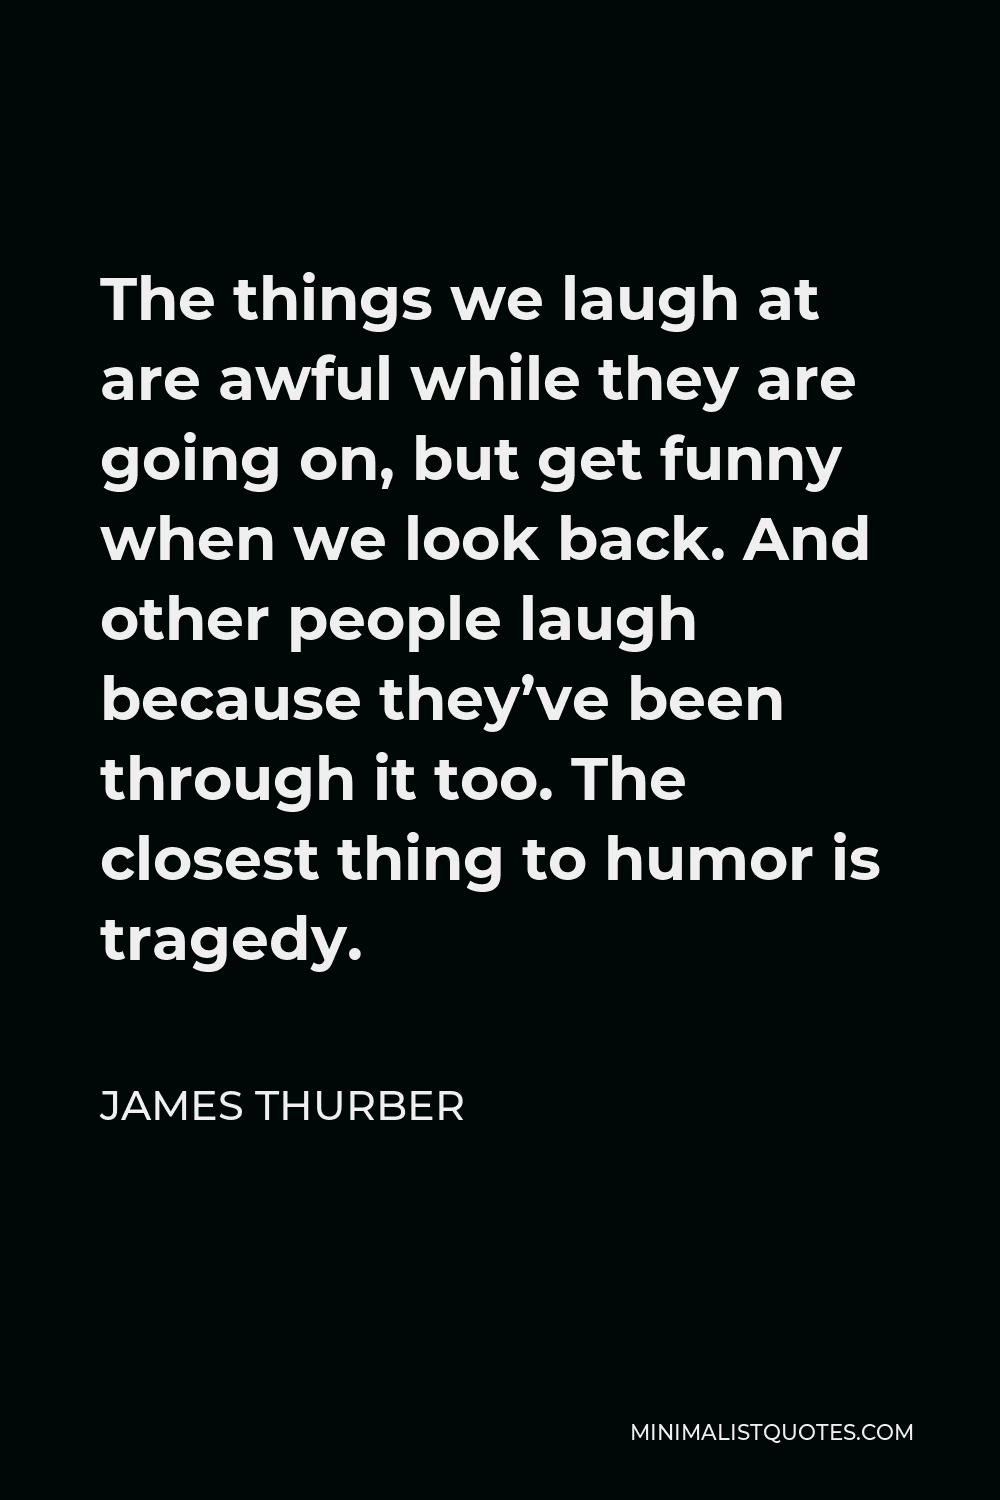 James Thurber Quote - The things we laugh at are awful while they are going on, but get funny when we look back. And other people laugh because they’ve been through it too. The closest thing to humor is tragedy.